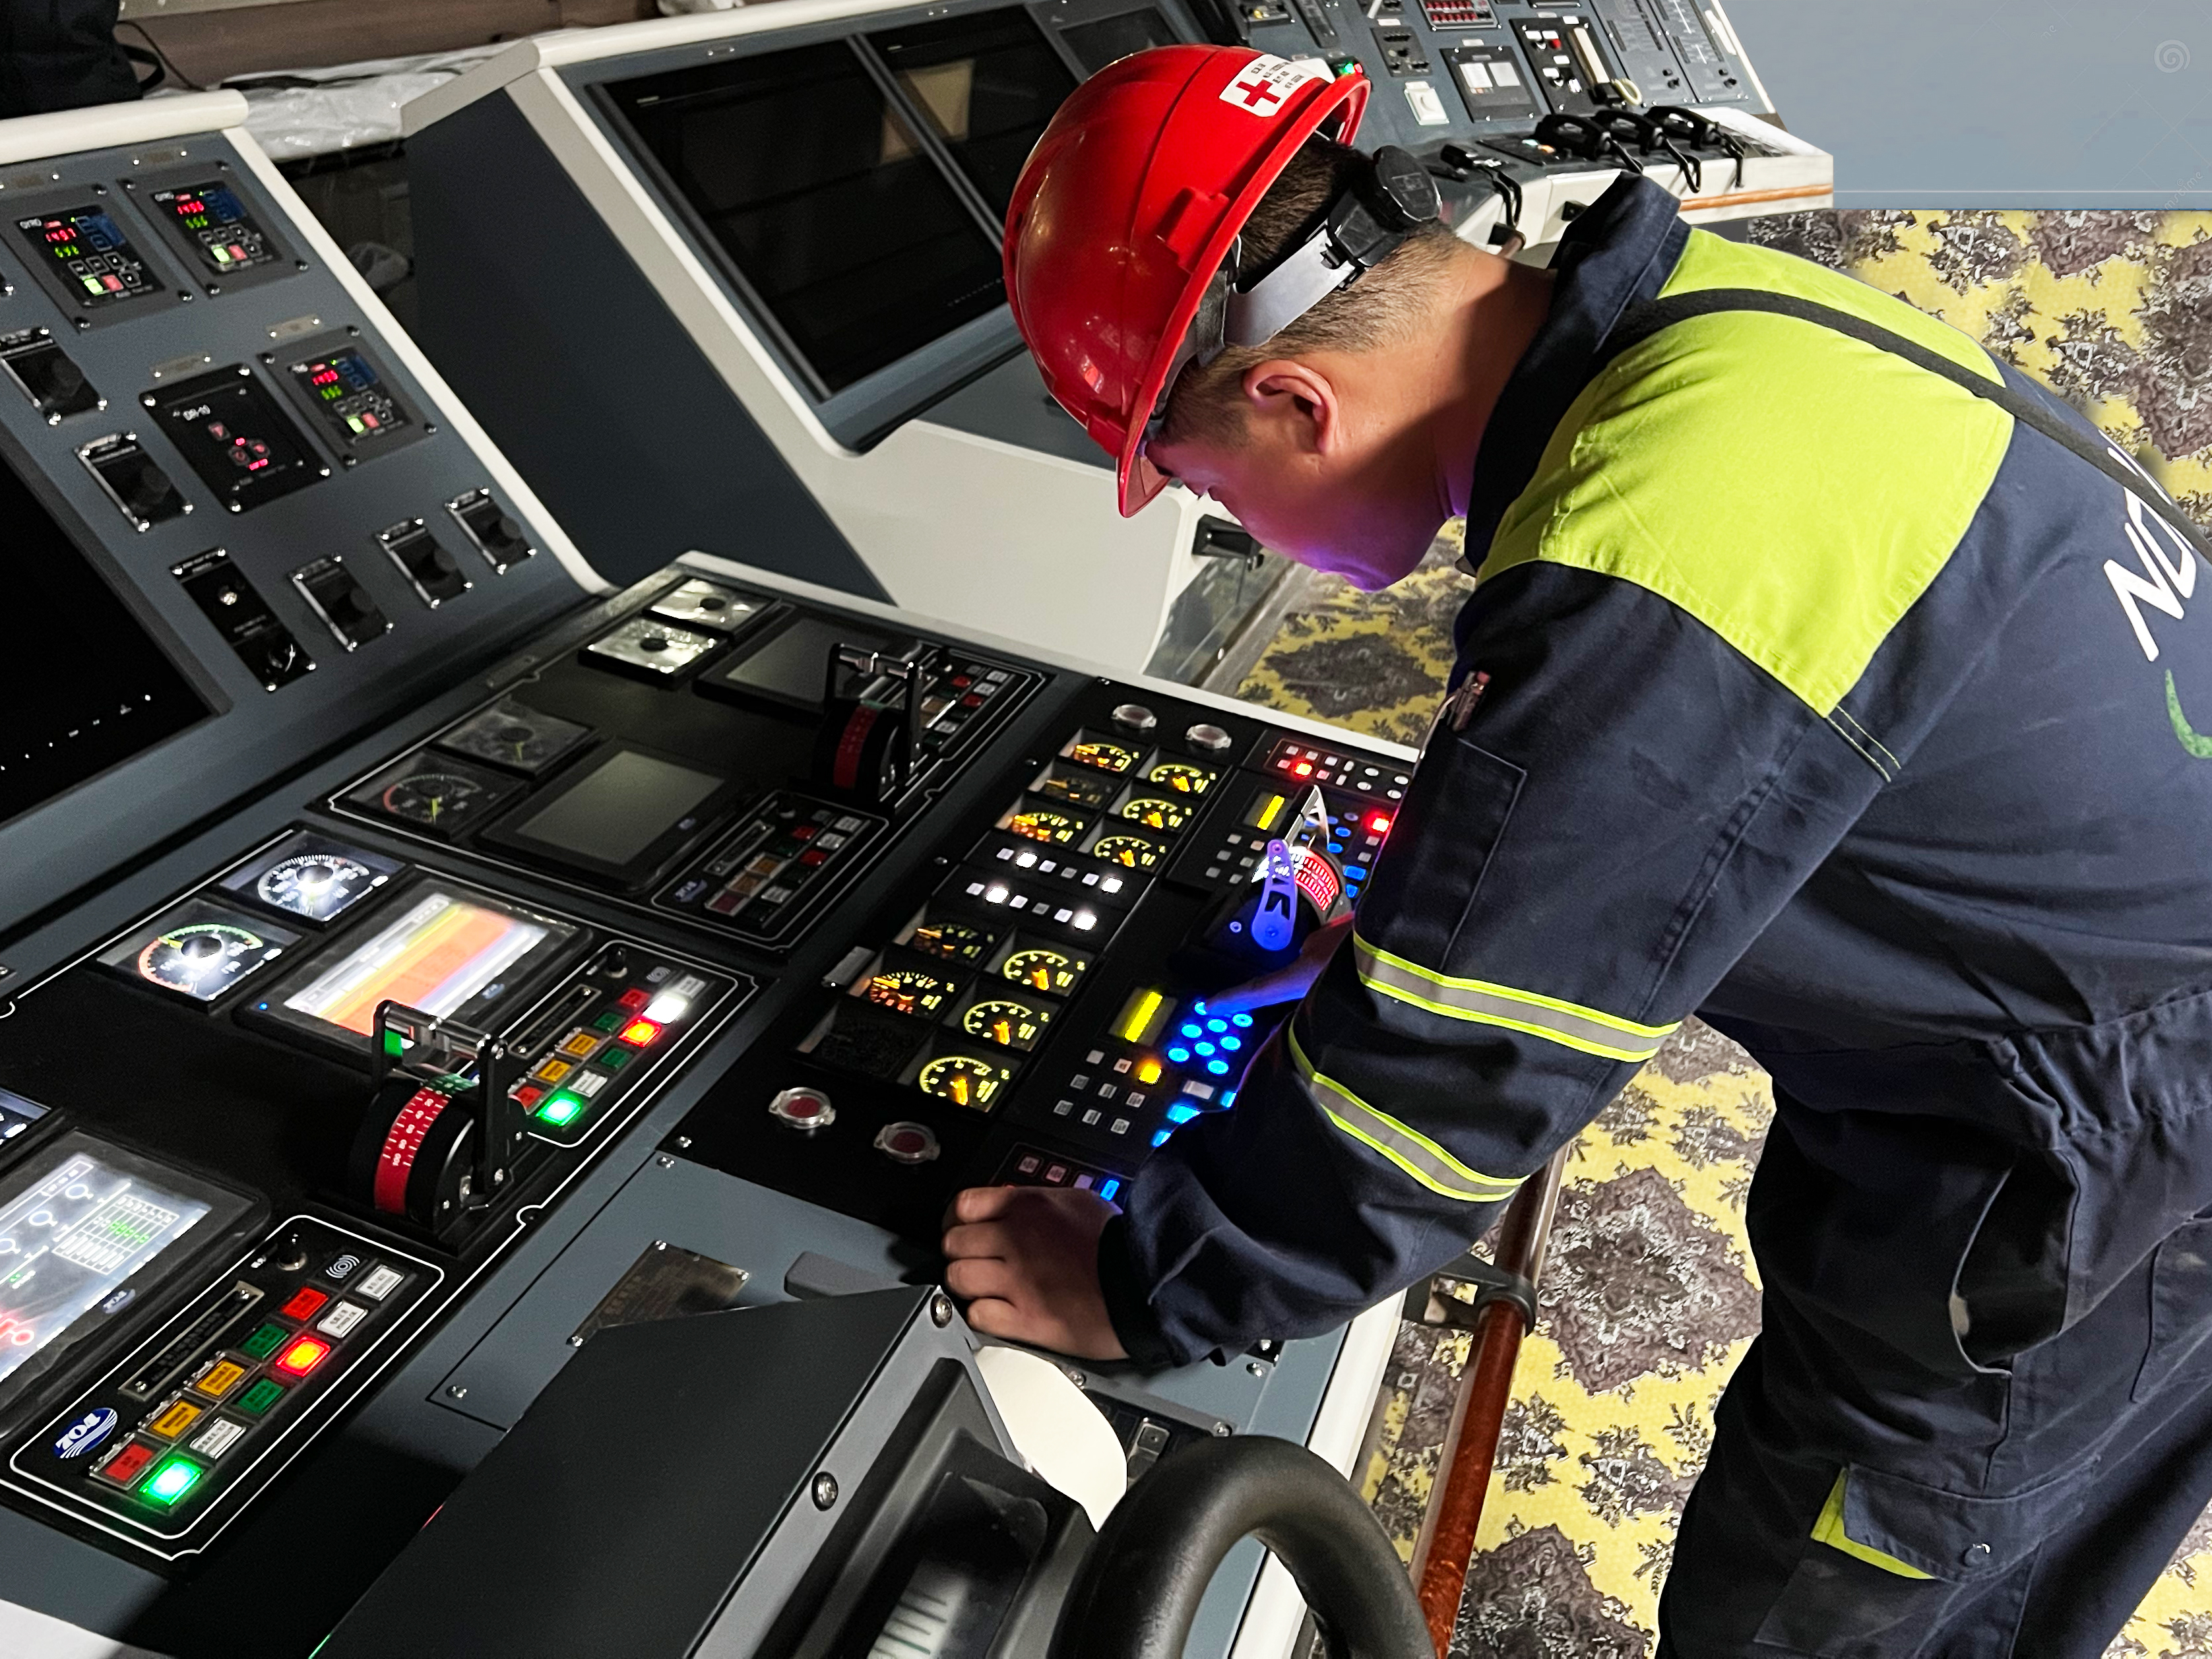 The image shows a big bridge panel with a control panel of Noris. A Noris service technician is testing the panel